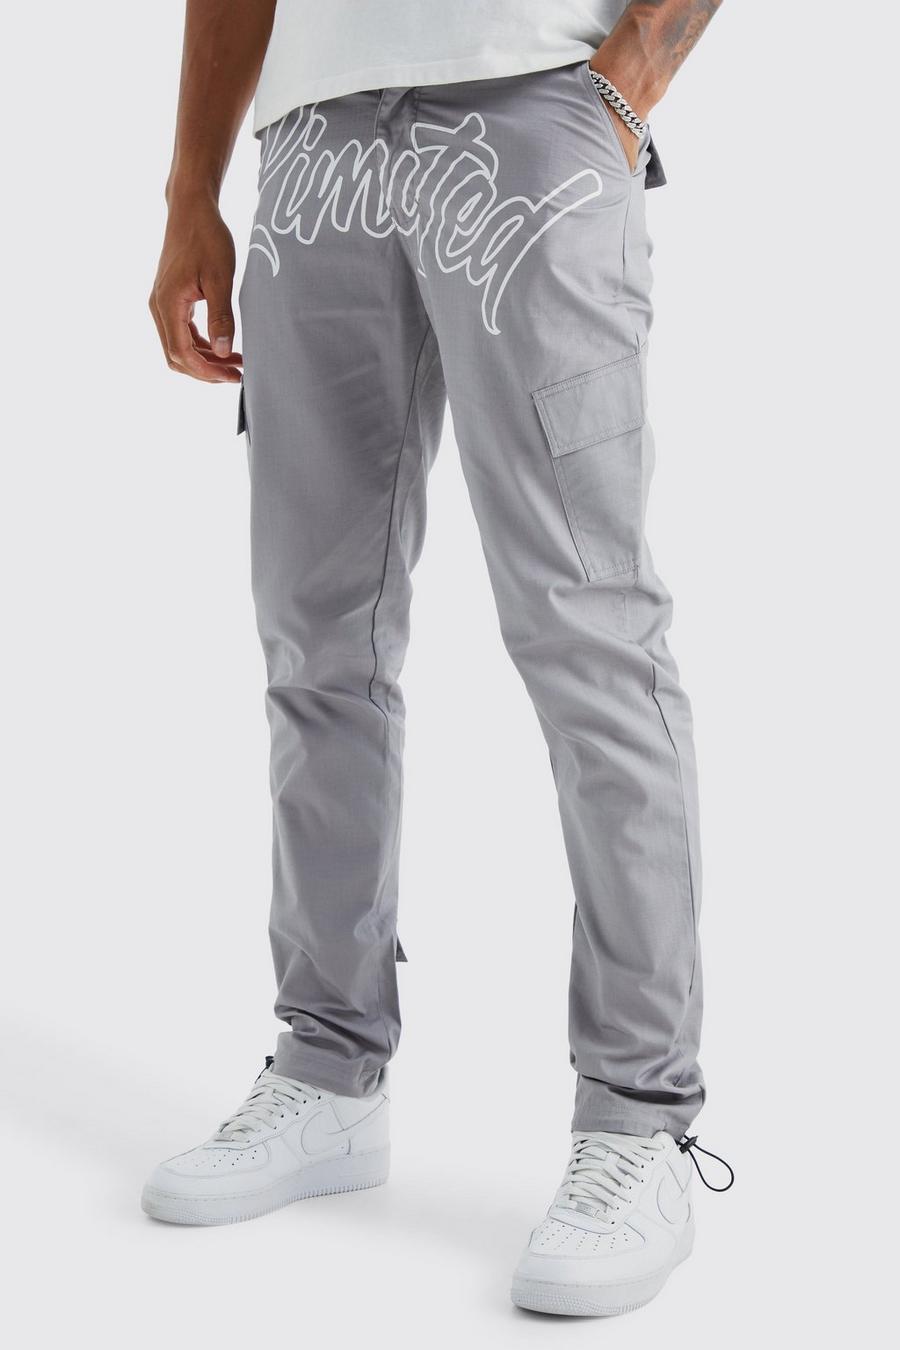 Charcoal Tall Slim Ripstop Cargo Limited Text Print Trouser